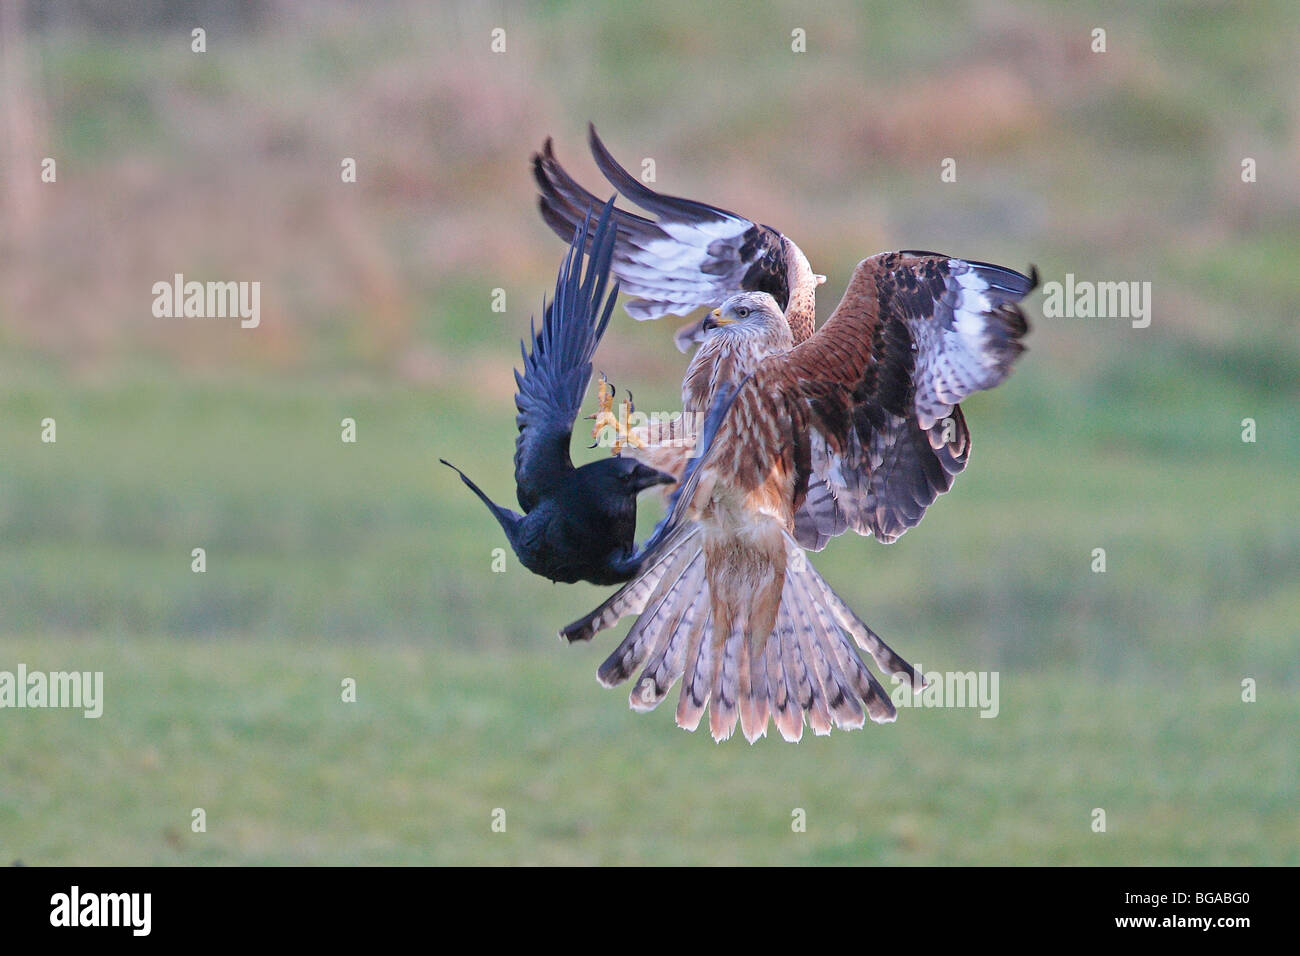 Red Kite and Carrion Crow fighting over food in flight Stock Photo